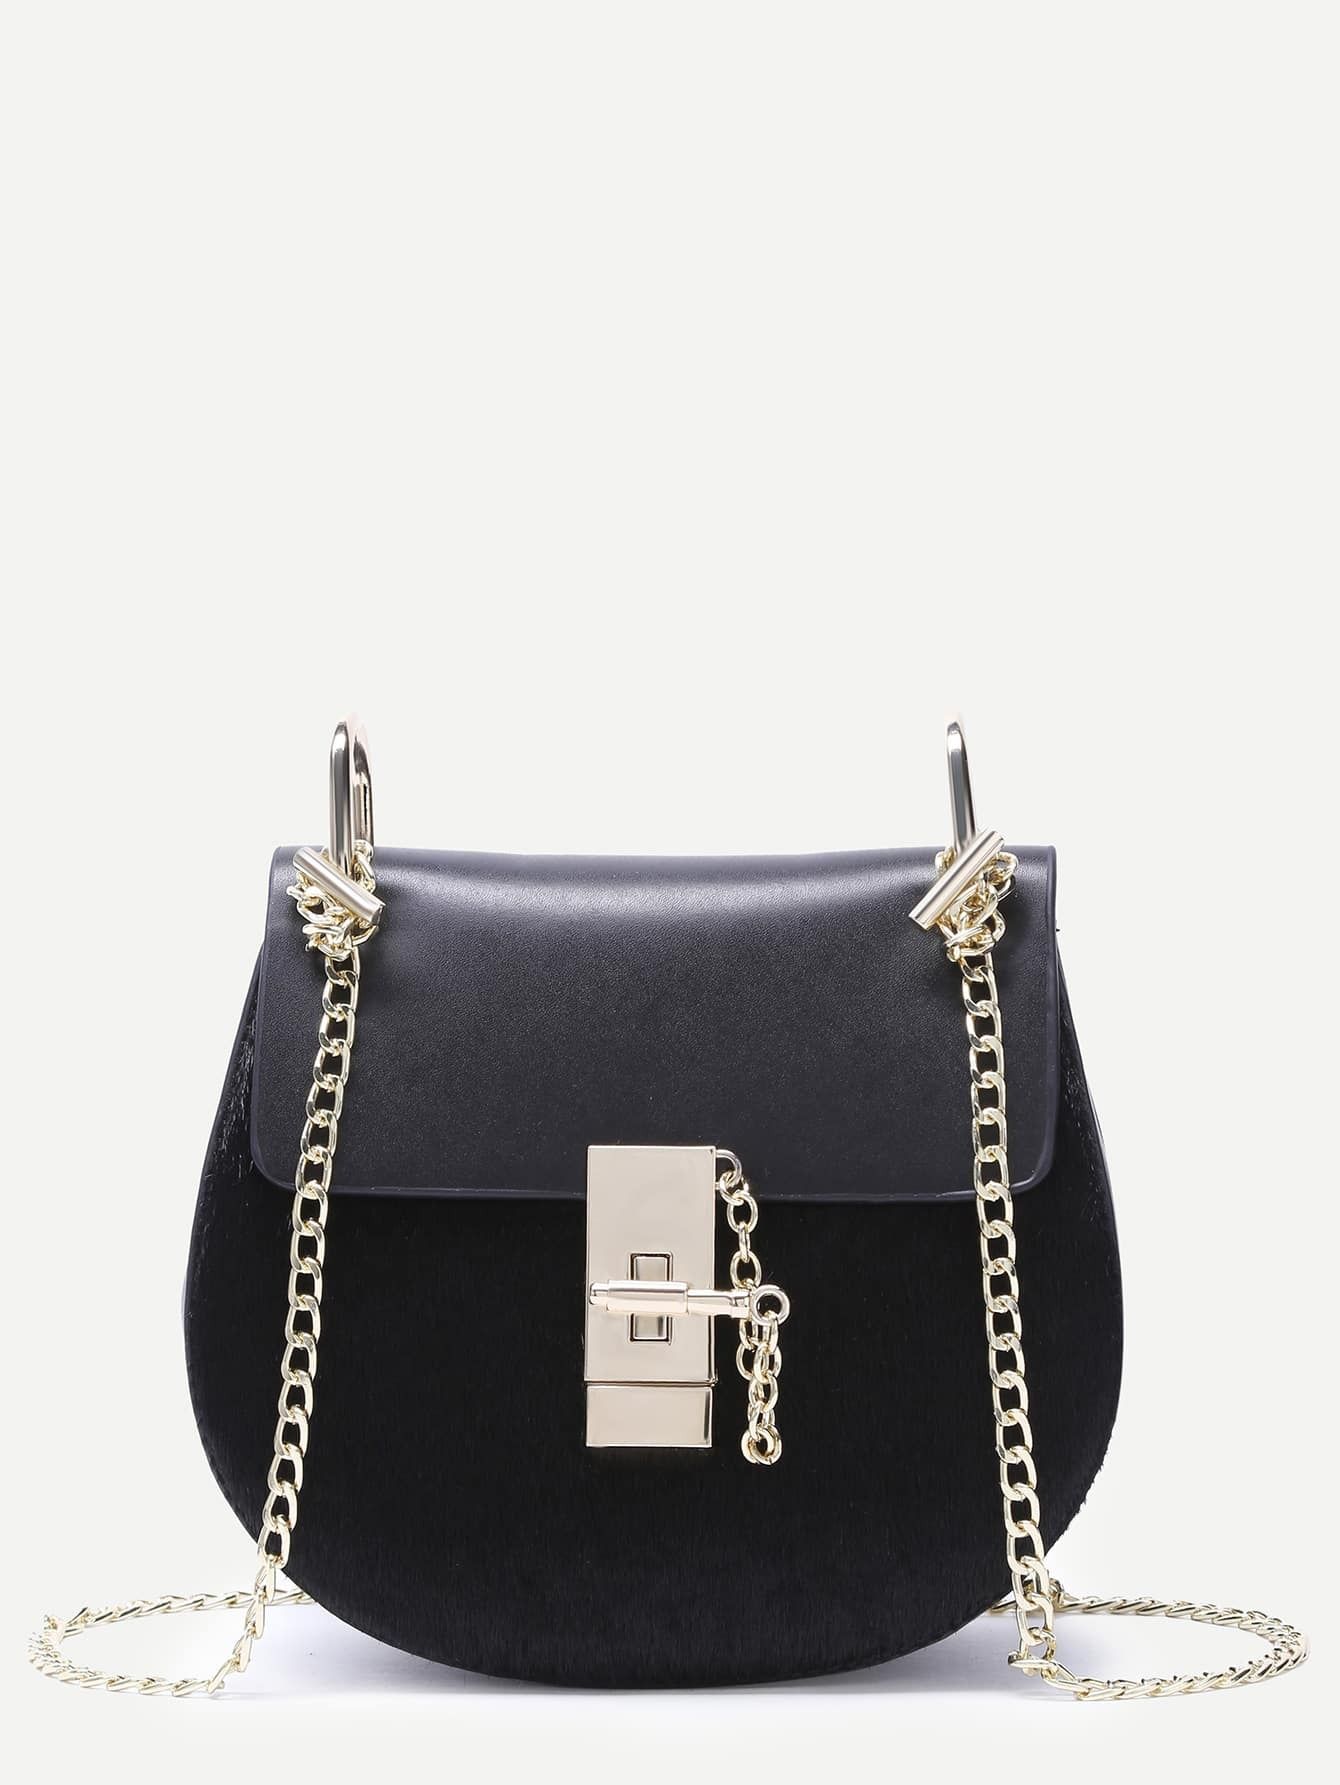 Black Horse Hair Covered PU Saddle Bag With Chain Strap | SHEIN